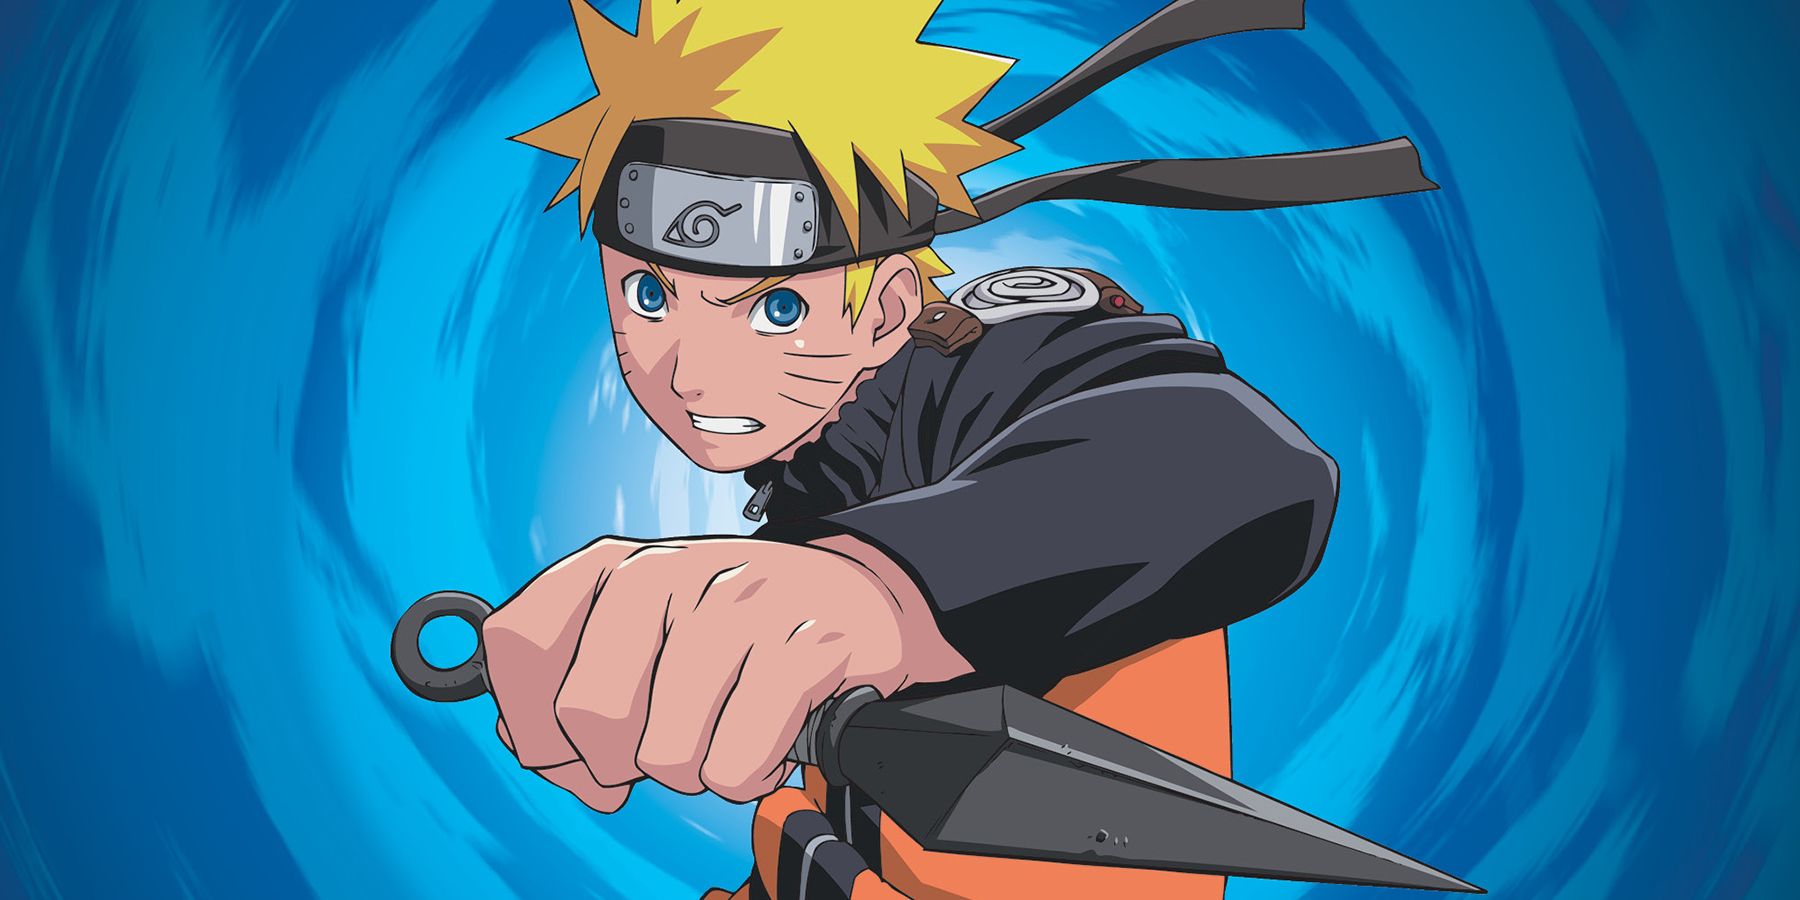 Greatest Showman Director Offers Naruto LiveAction Movie Update